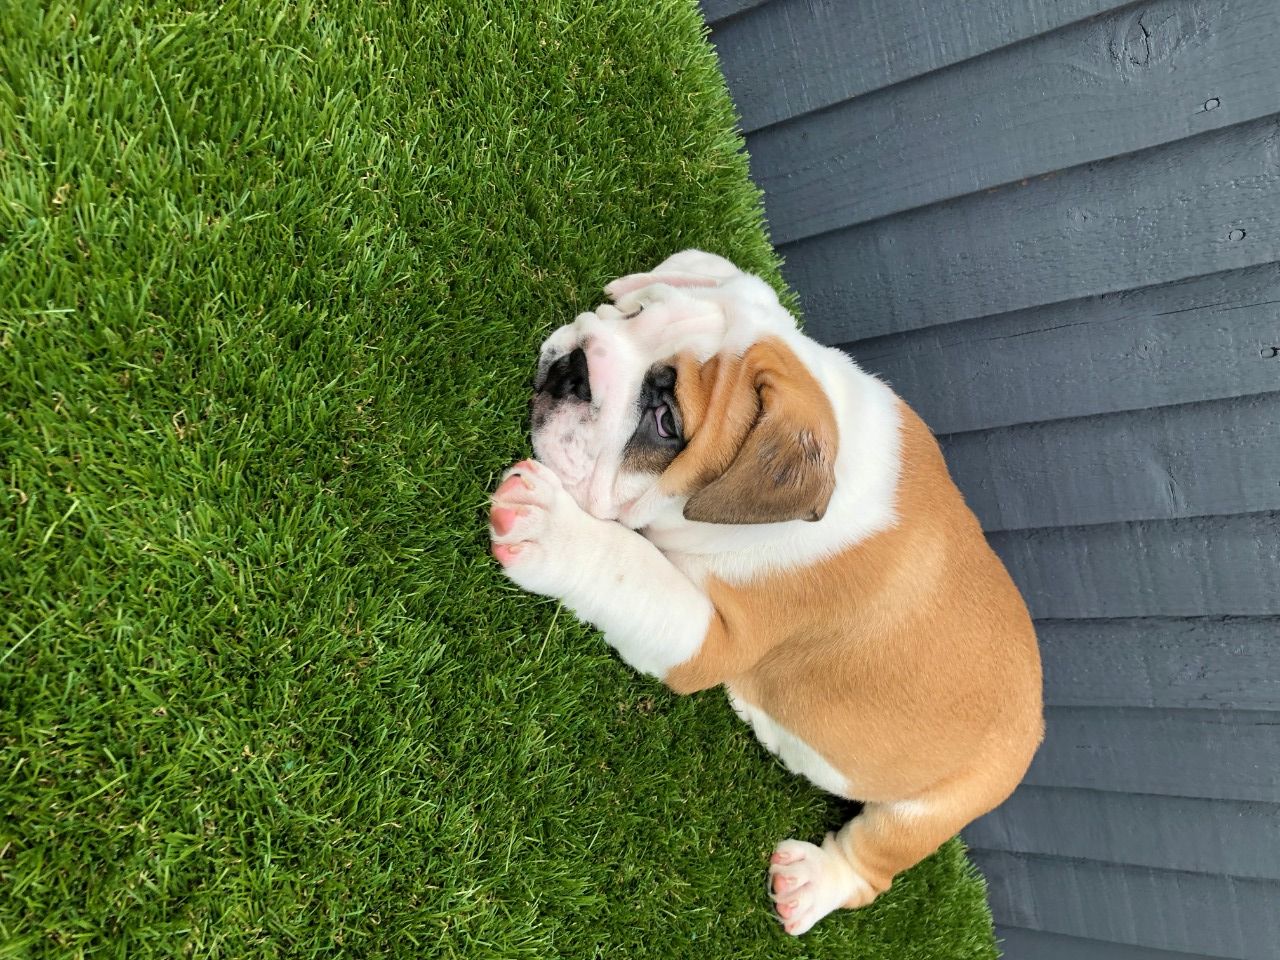 Bulldog Puppies for sale Classifieds.uk Free